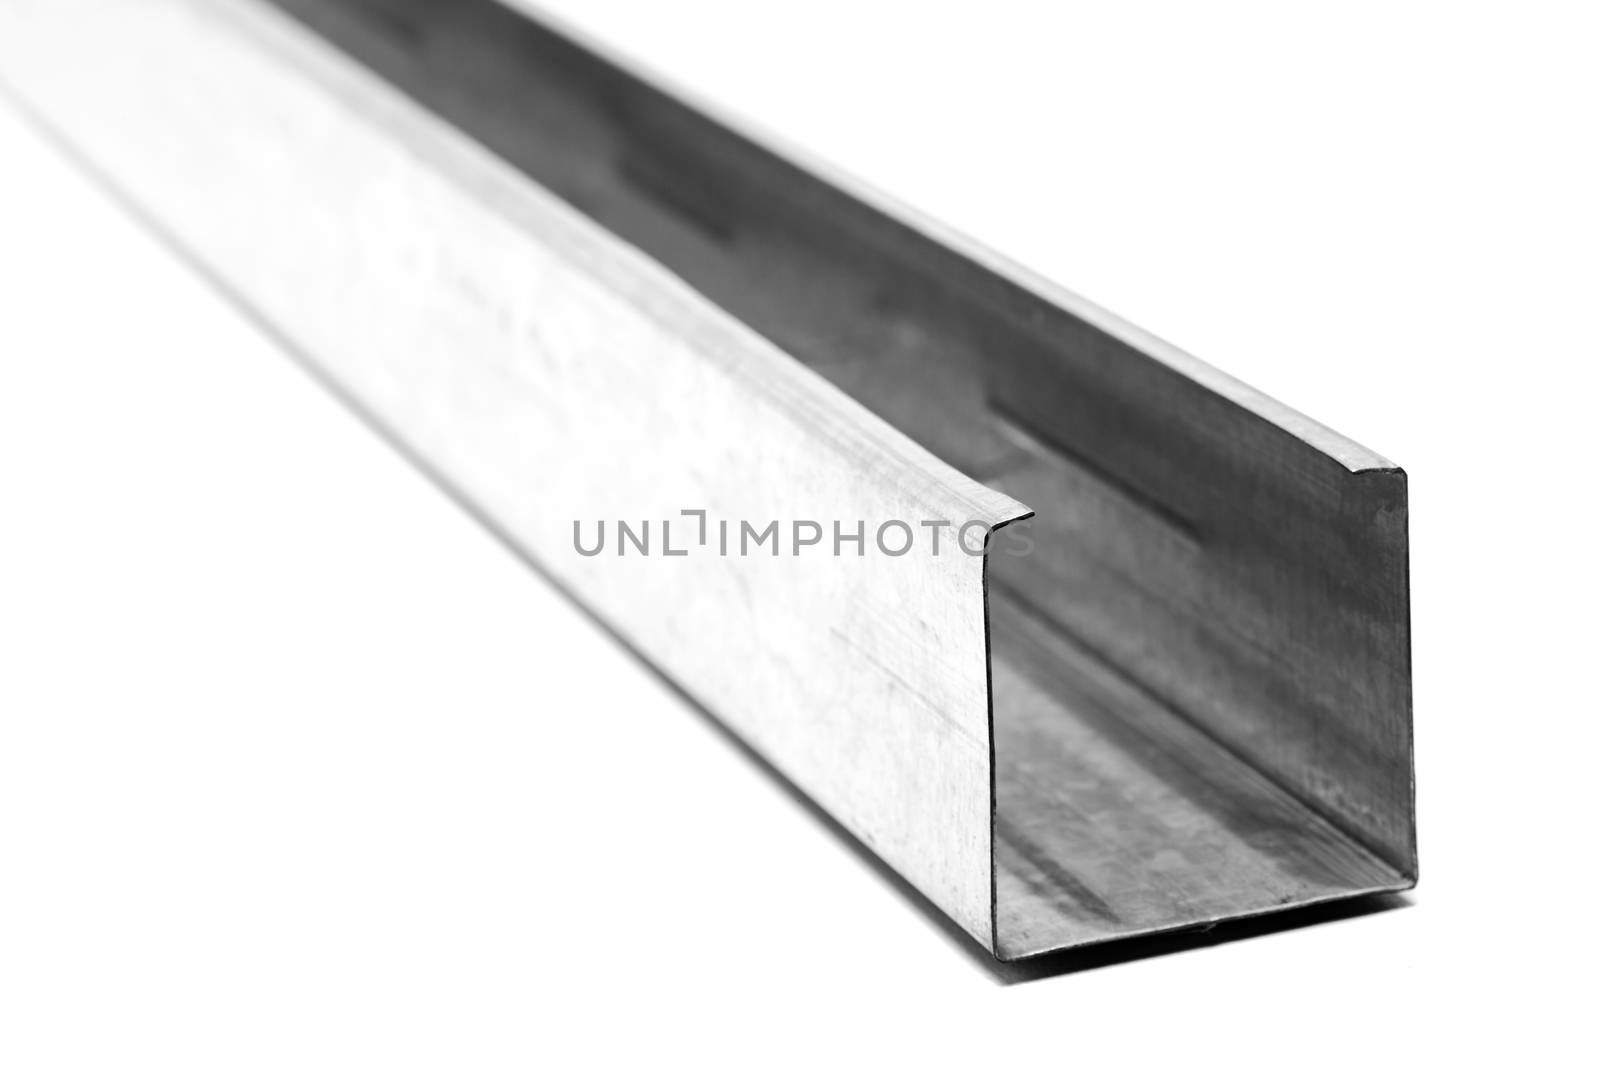 C shaped metal profile for drywall support isolated on white background